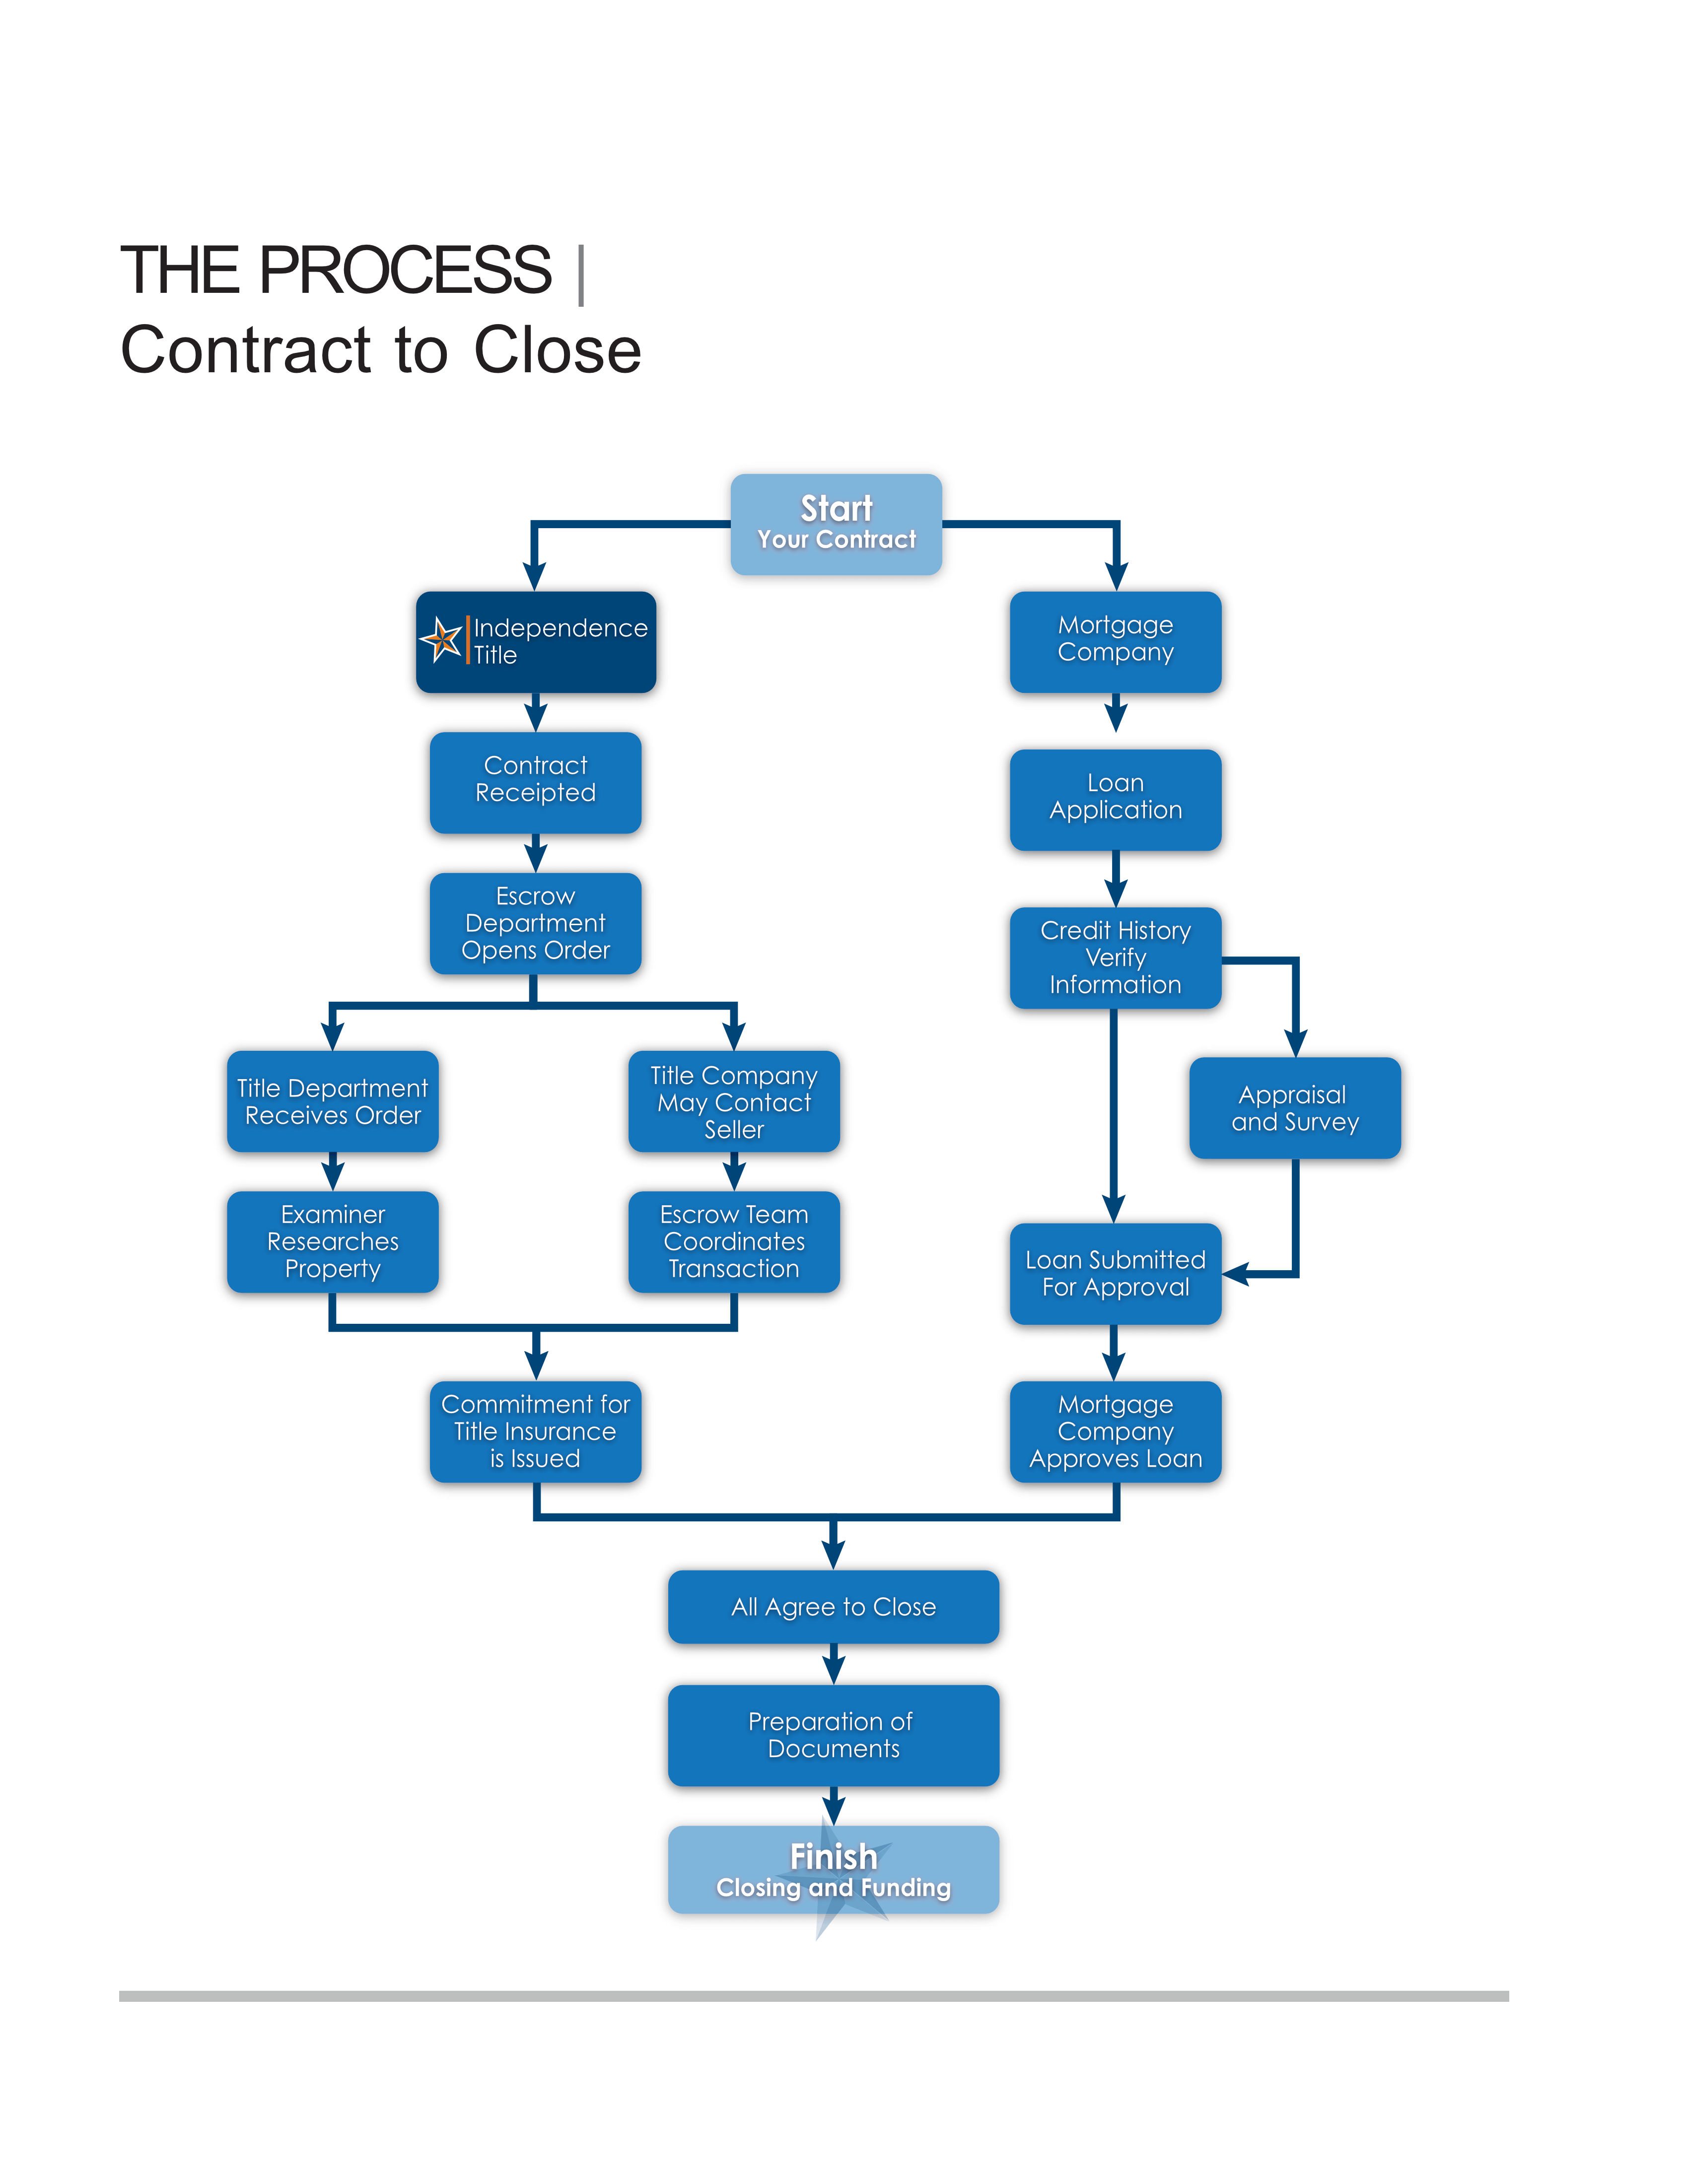 The Selling Process6-Contract to Close